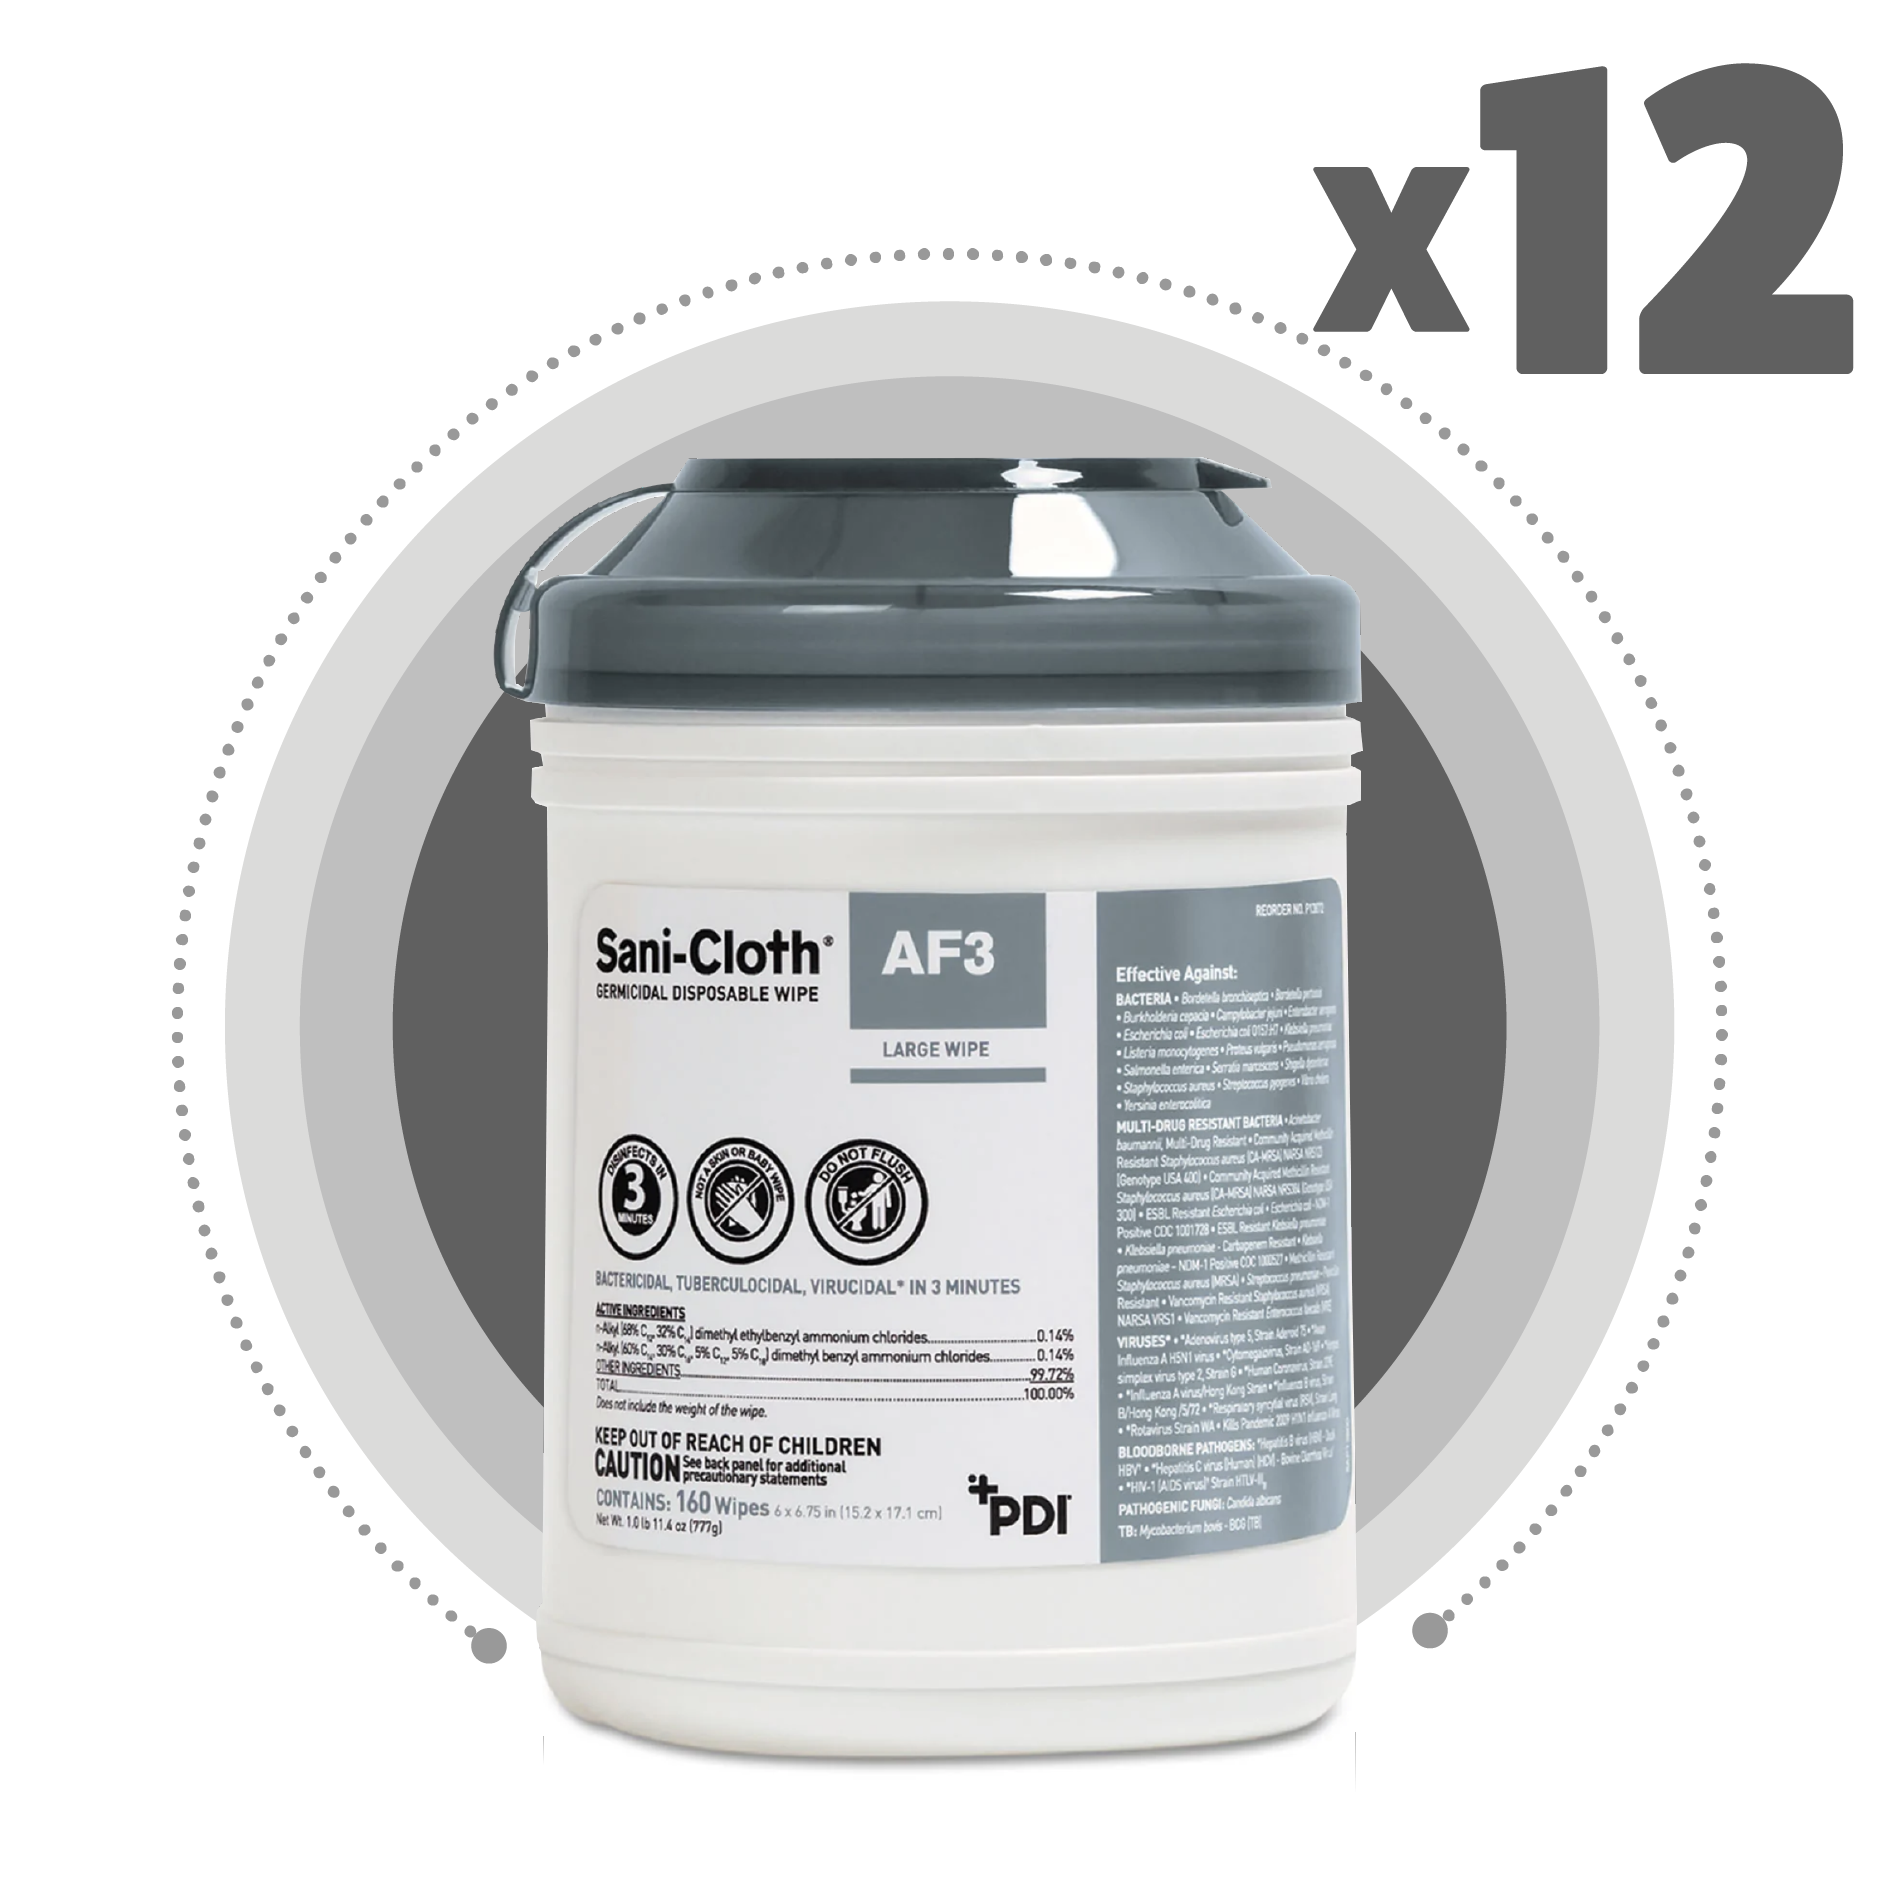 Sani-Cloth AF3 P13872 Alcohol-Free Disposable Disinfectant Wipes